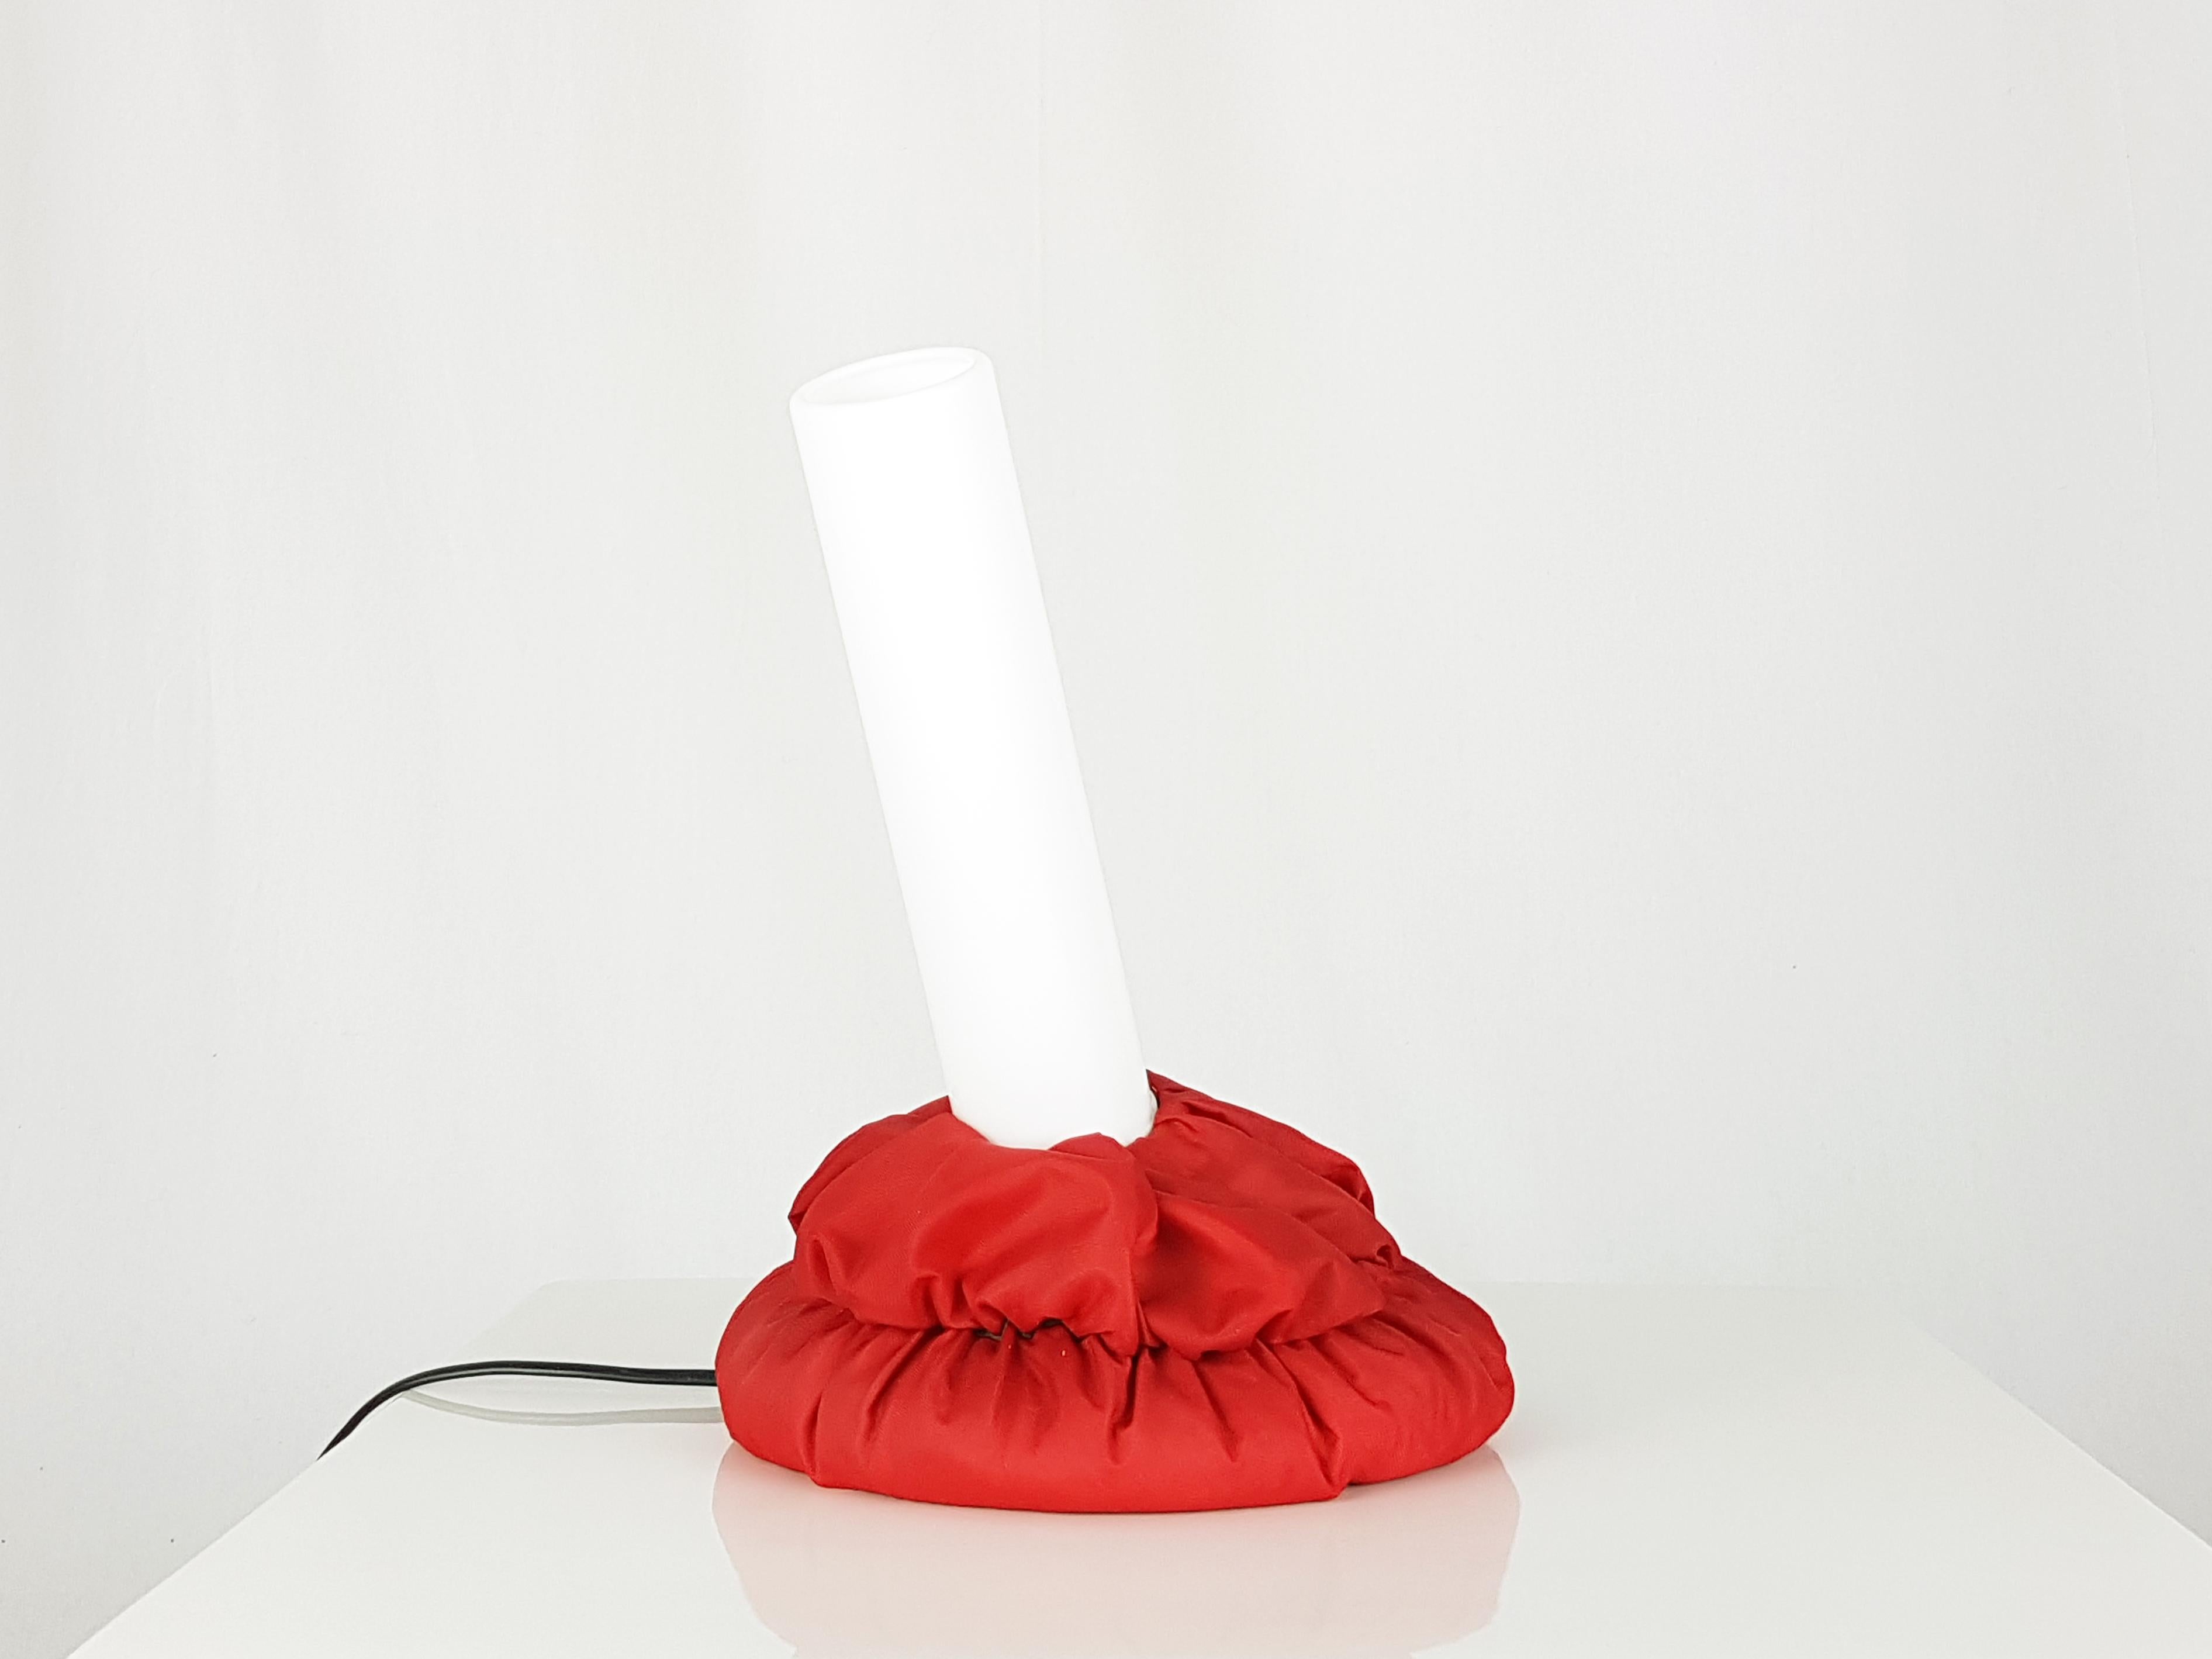 The base is a synthetic fabric bag filled with small plastic pellets. The lampshade is an orientable perspex cylinder. Very good condition: the two lamps are in excellent condition, but both have an imperceptible cut/hole on the fabric as shown in